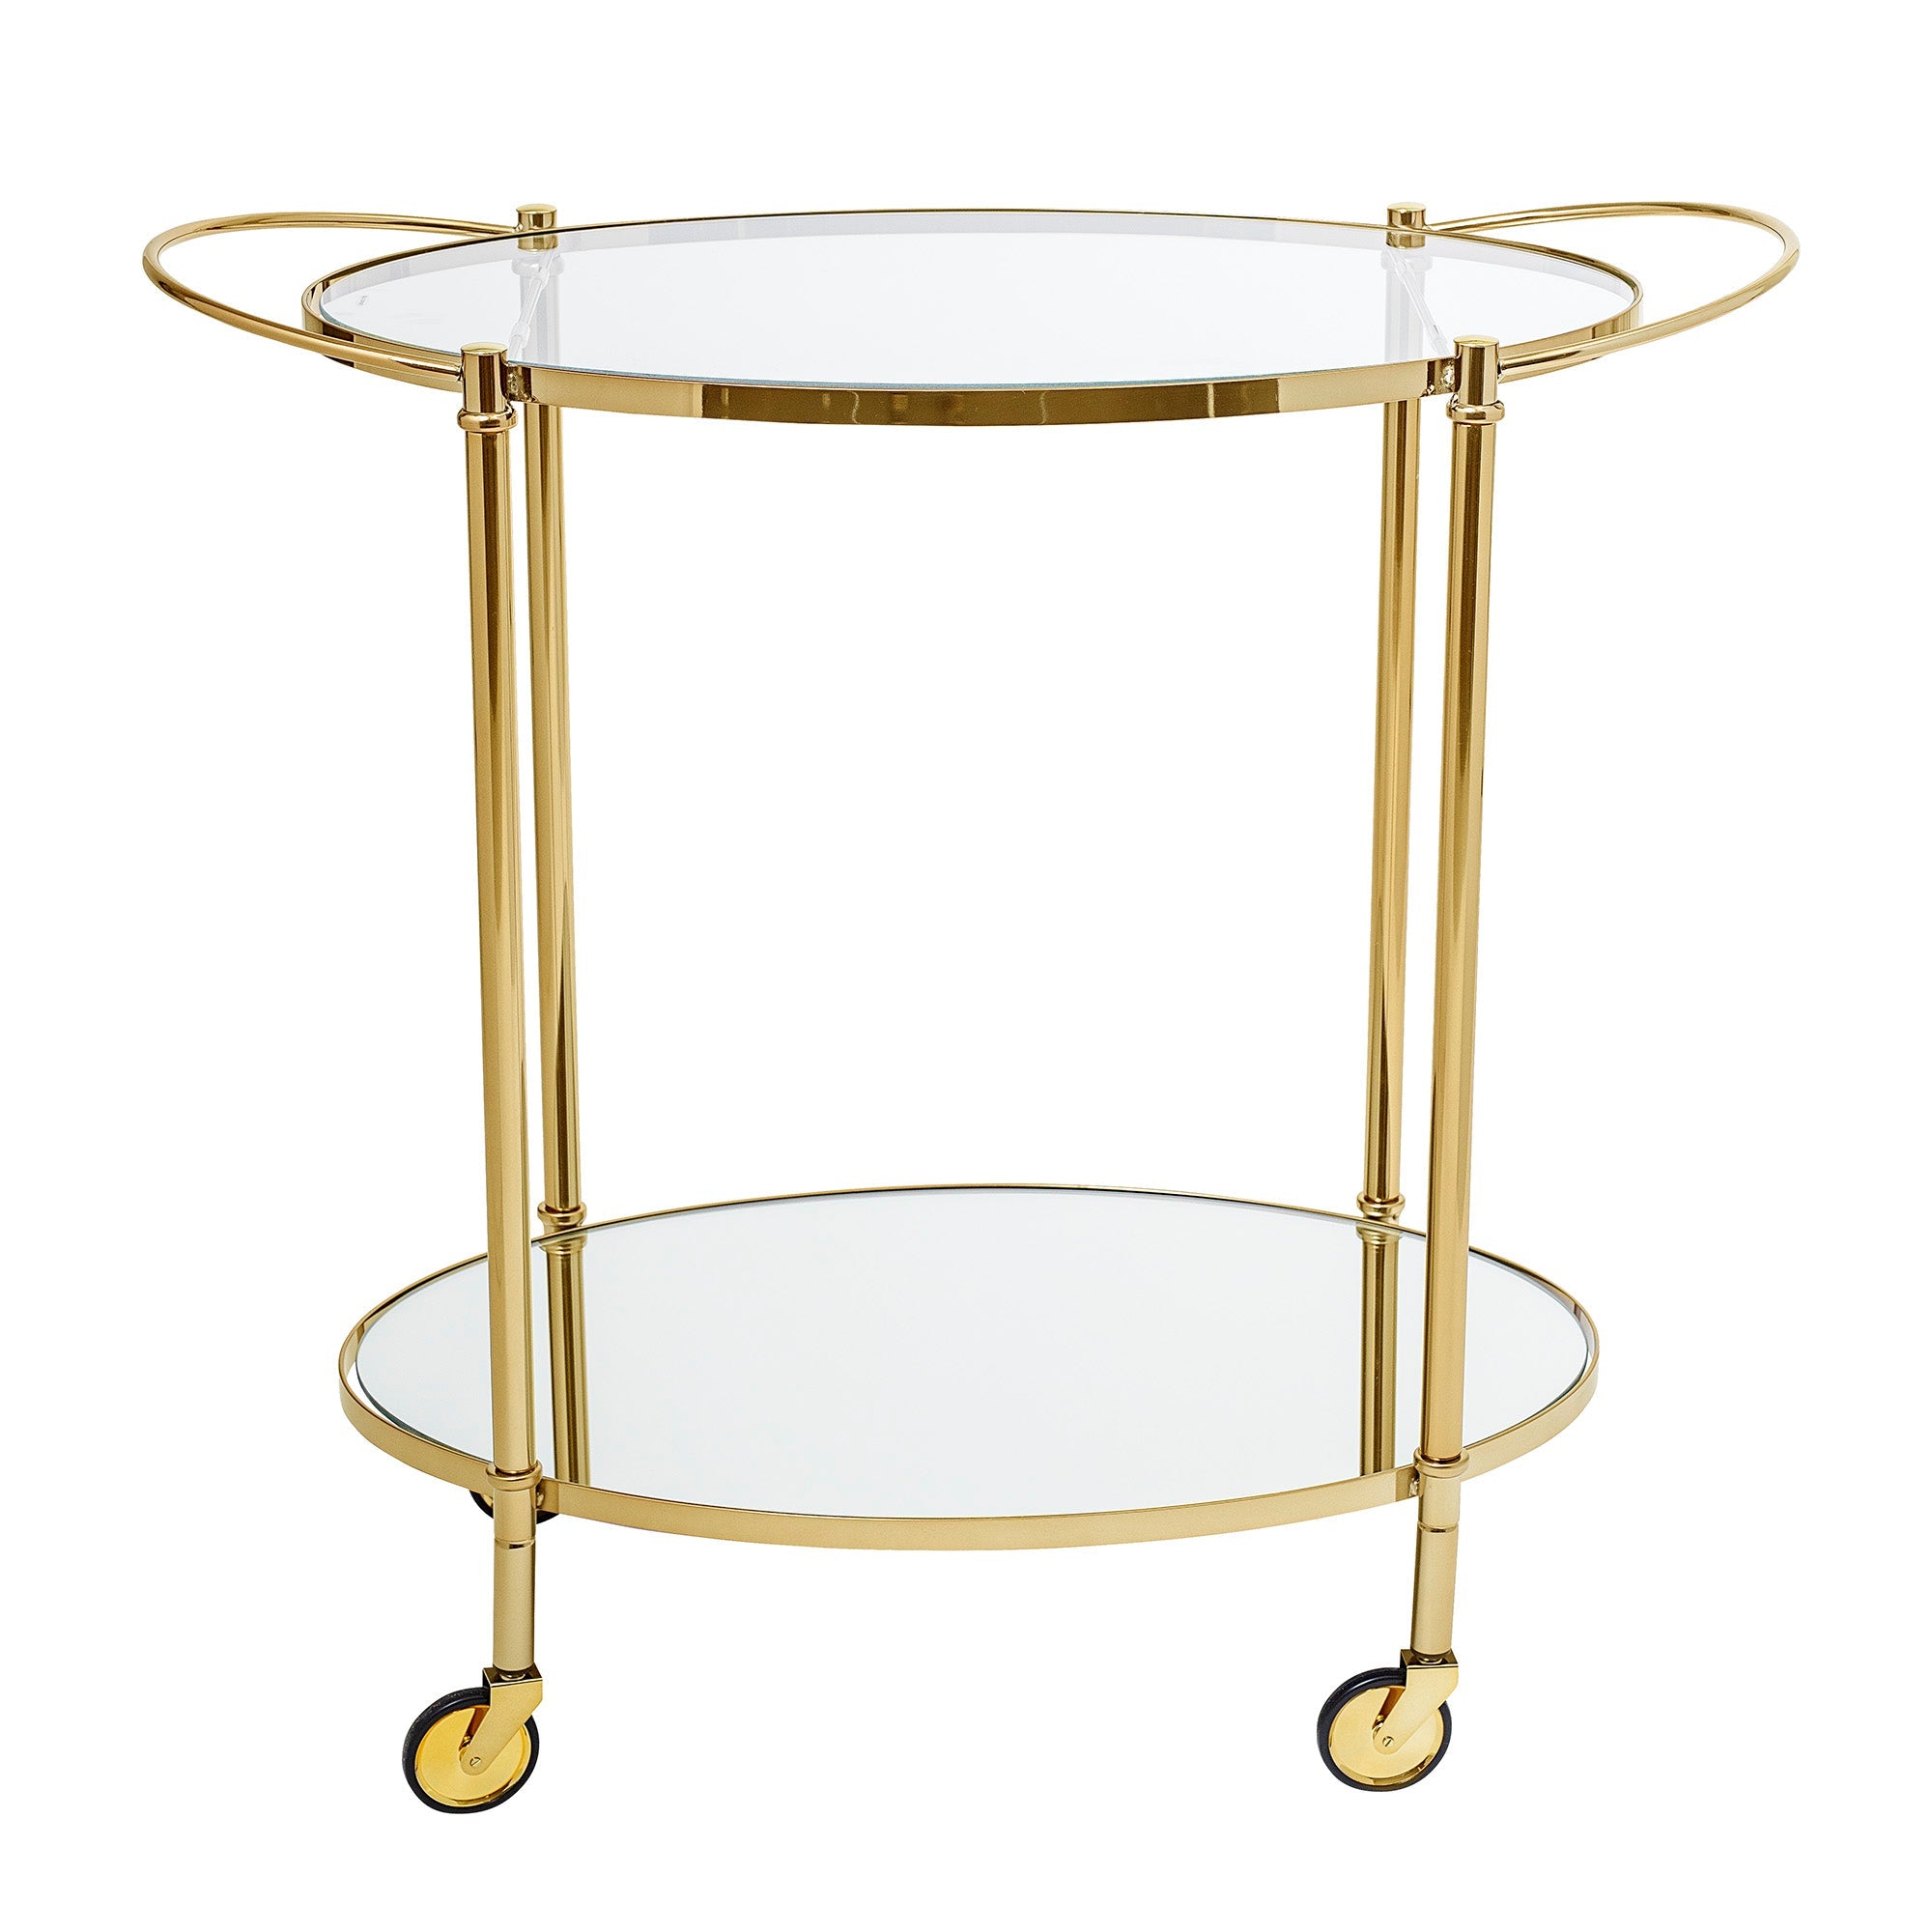 Fine is not only a bar stroller, but also an accessory that can act as a side table, a place to display unique things. Placing wheels instead of legs will facilitate the rearranging. The delicate, iron frame painted in gold will give elegance to many interiors from Scandinavian to Boho. Placing the glass top means that the whole is complemented by the room in a light way.